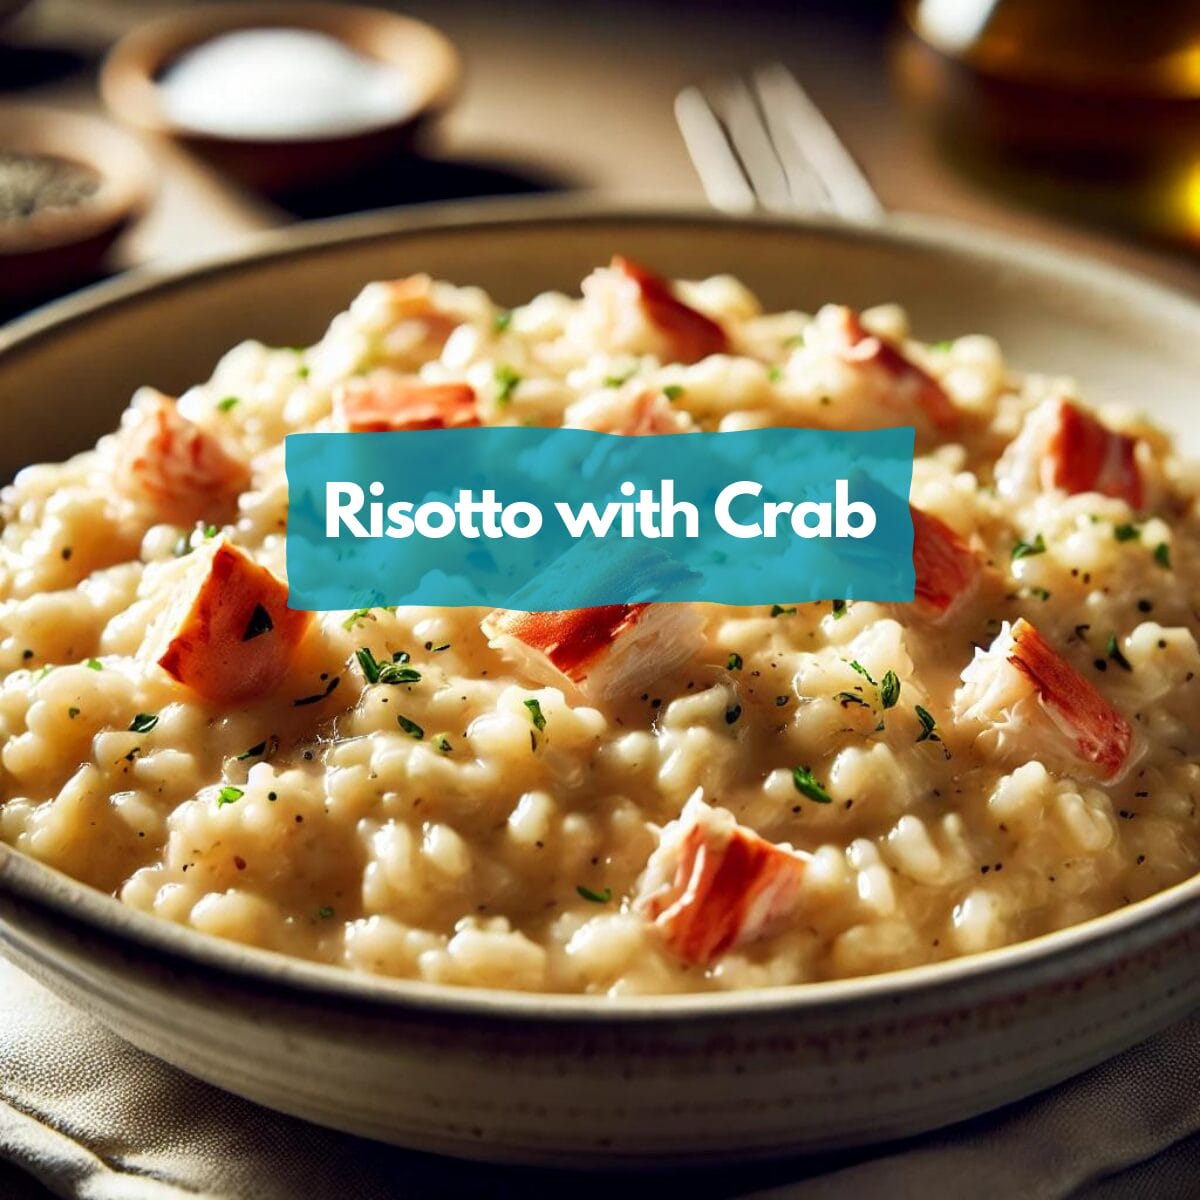 Risotto with Crab